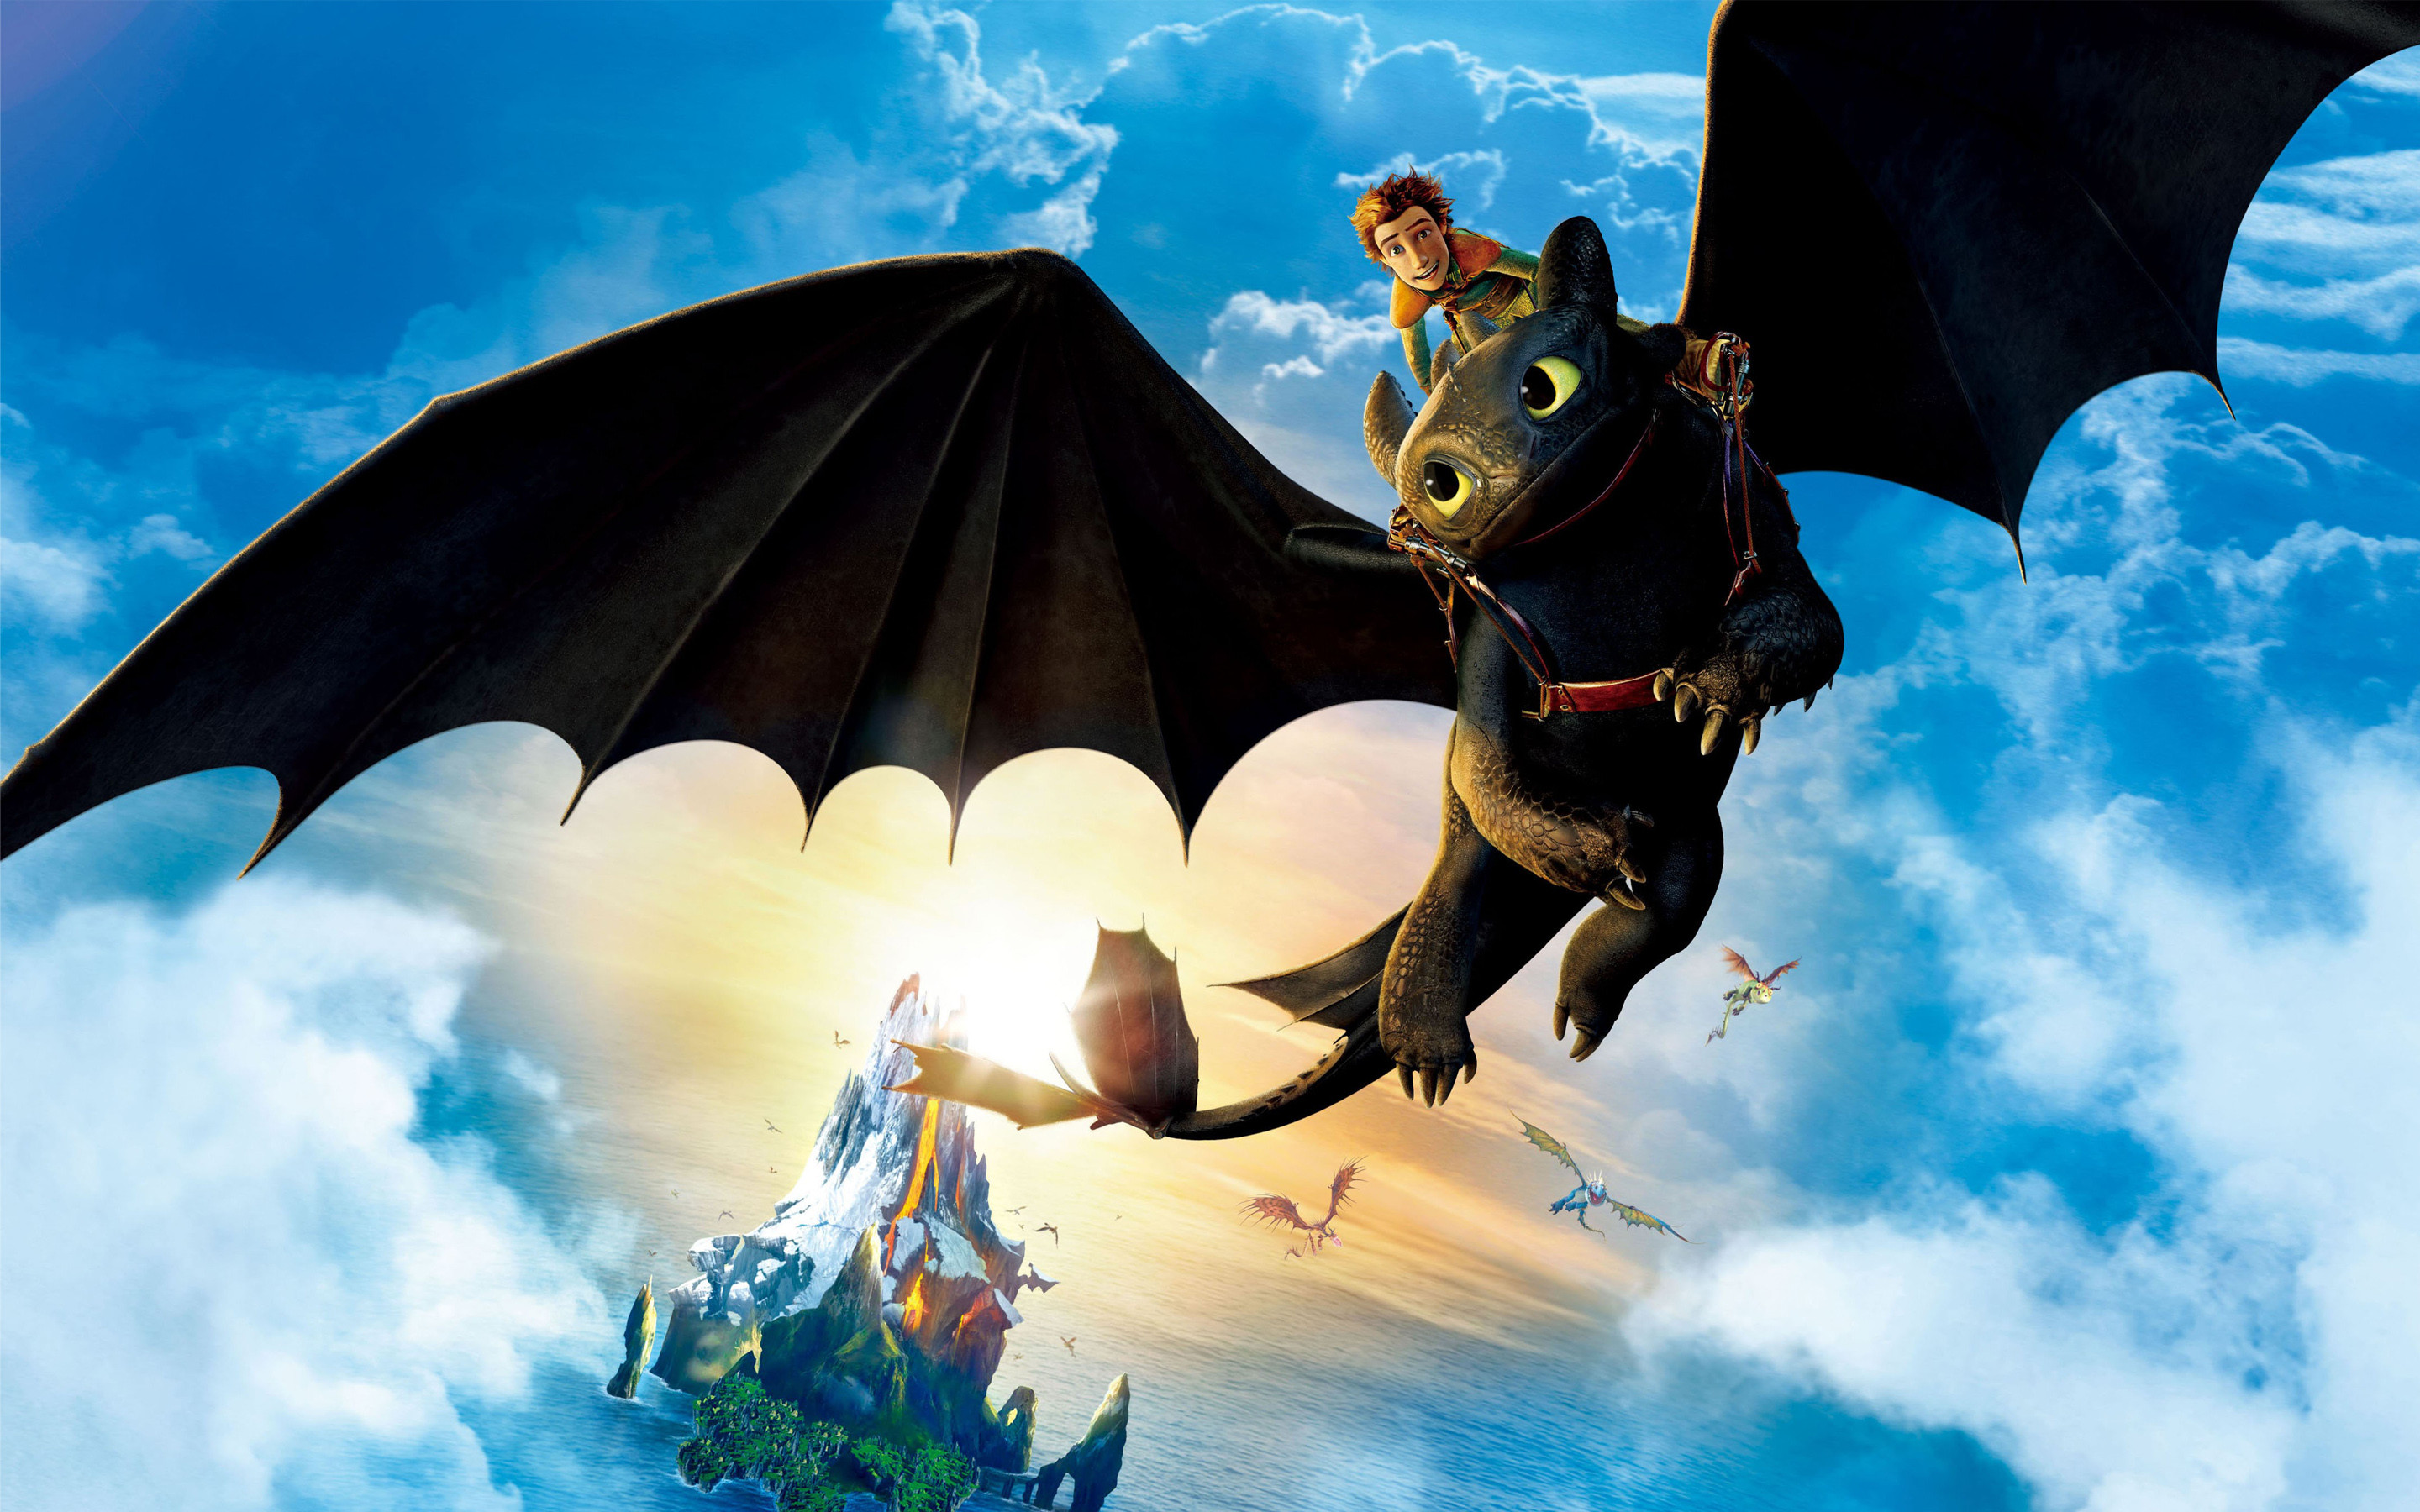 hiccup and toothless exclusive hd wallpapers 6787